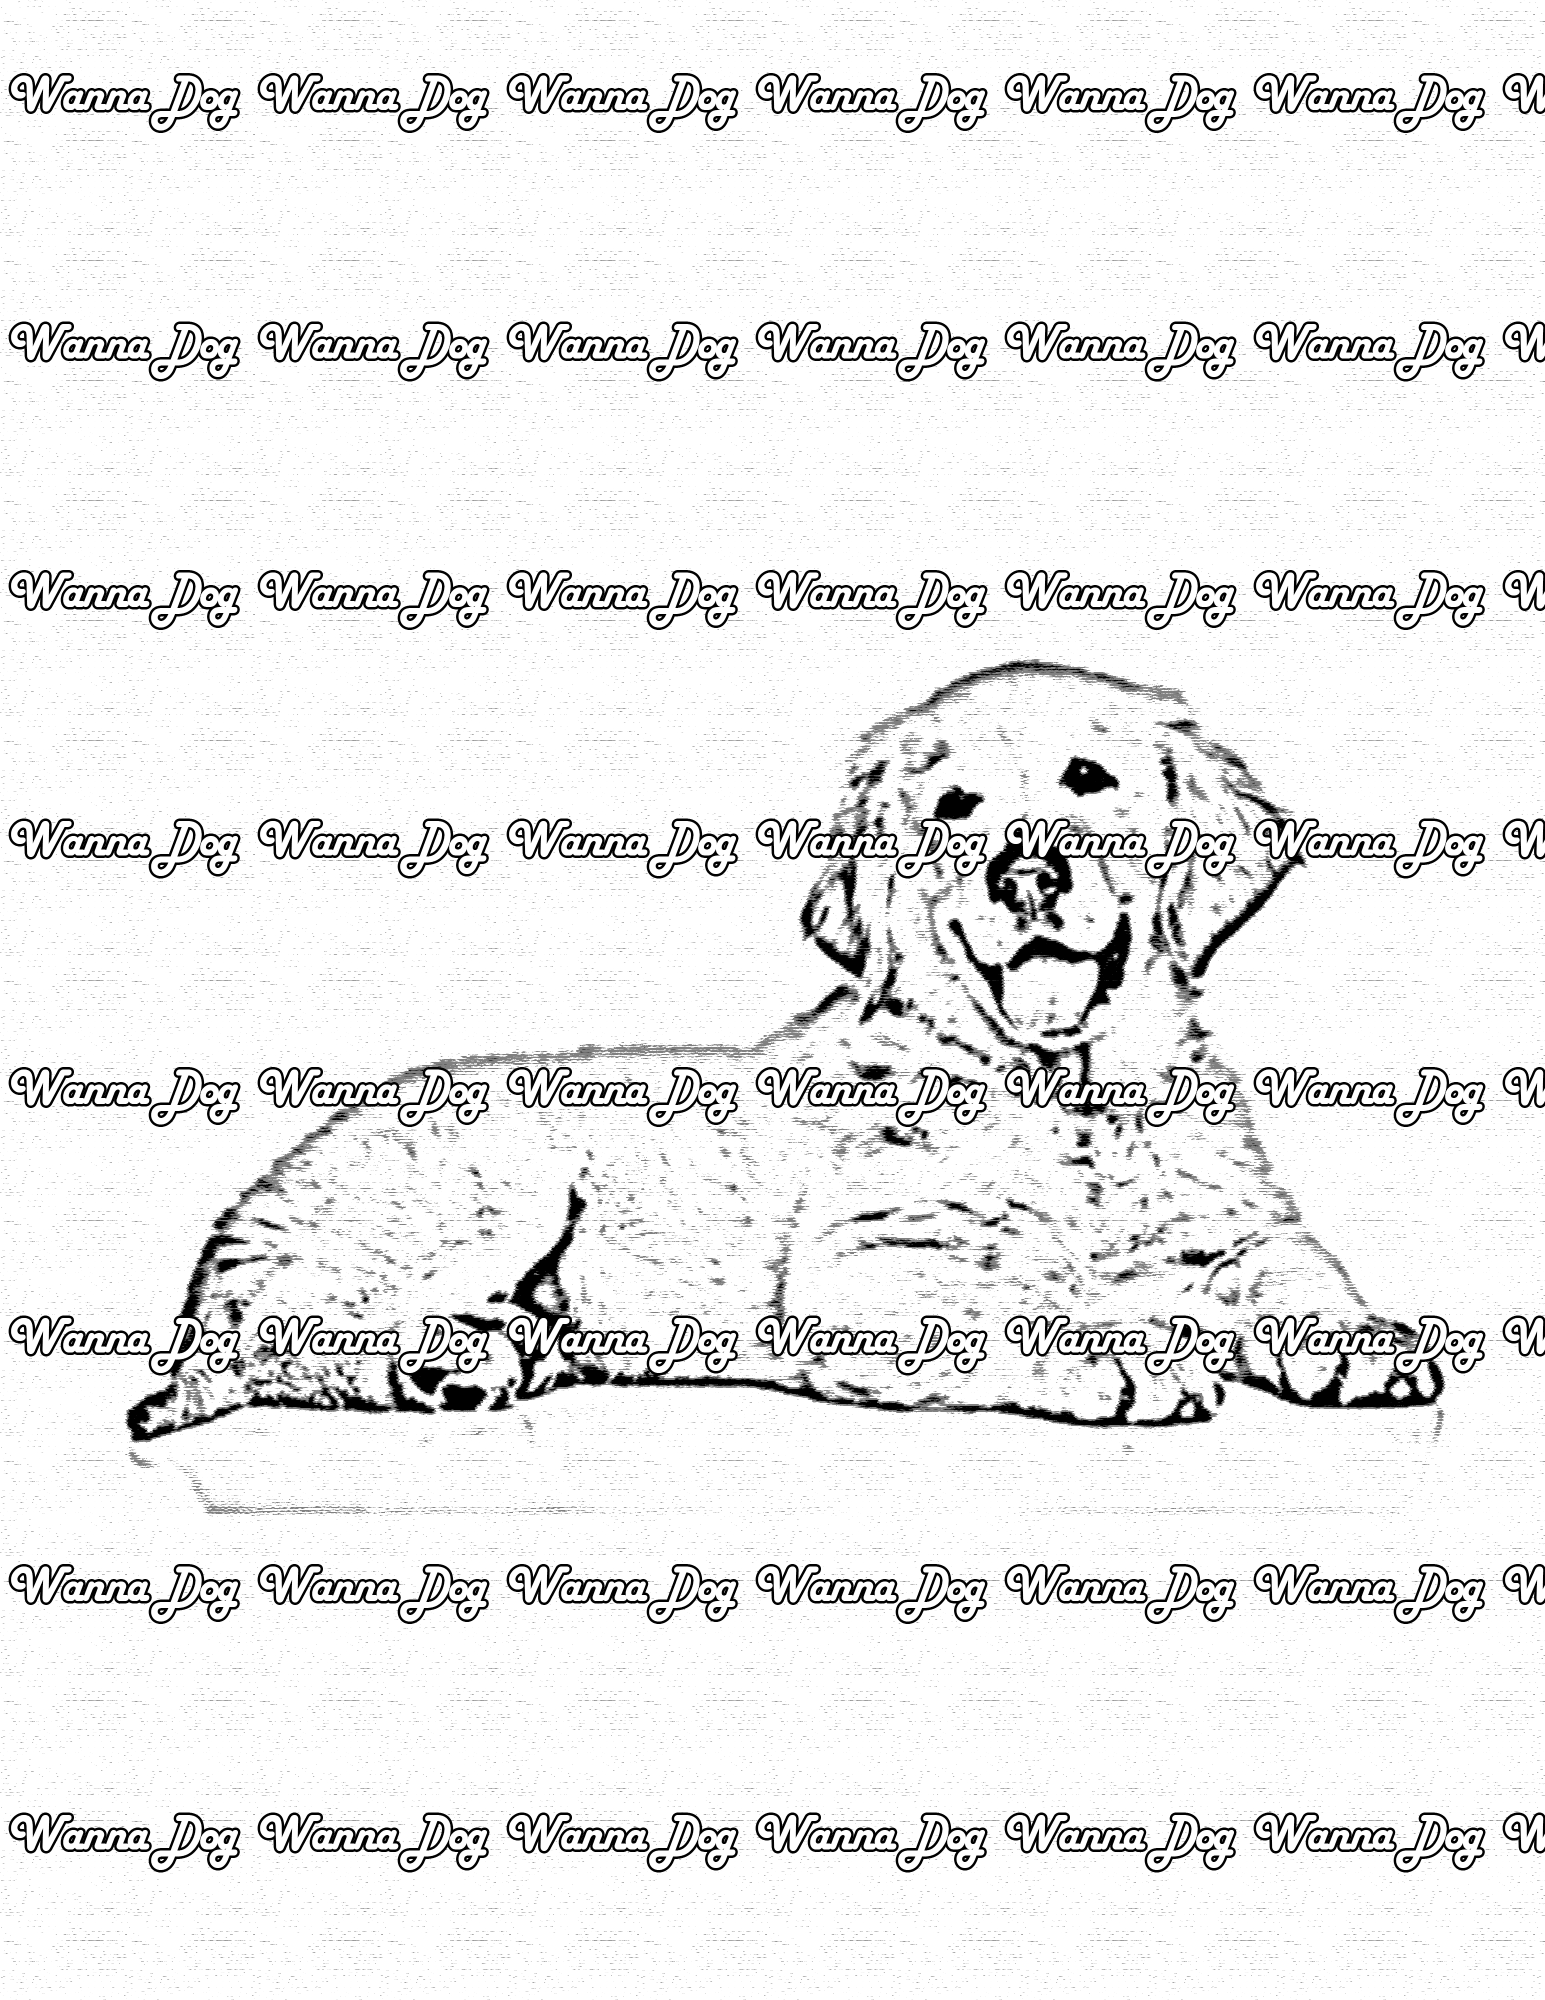 Golden Retriever Puppy Coloring Page of a Golden Retriever Puppy laying down and smiling